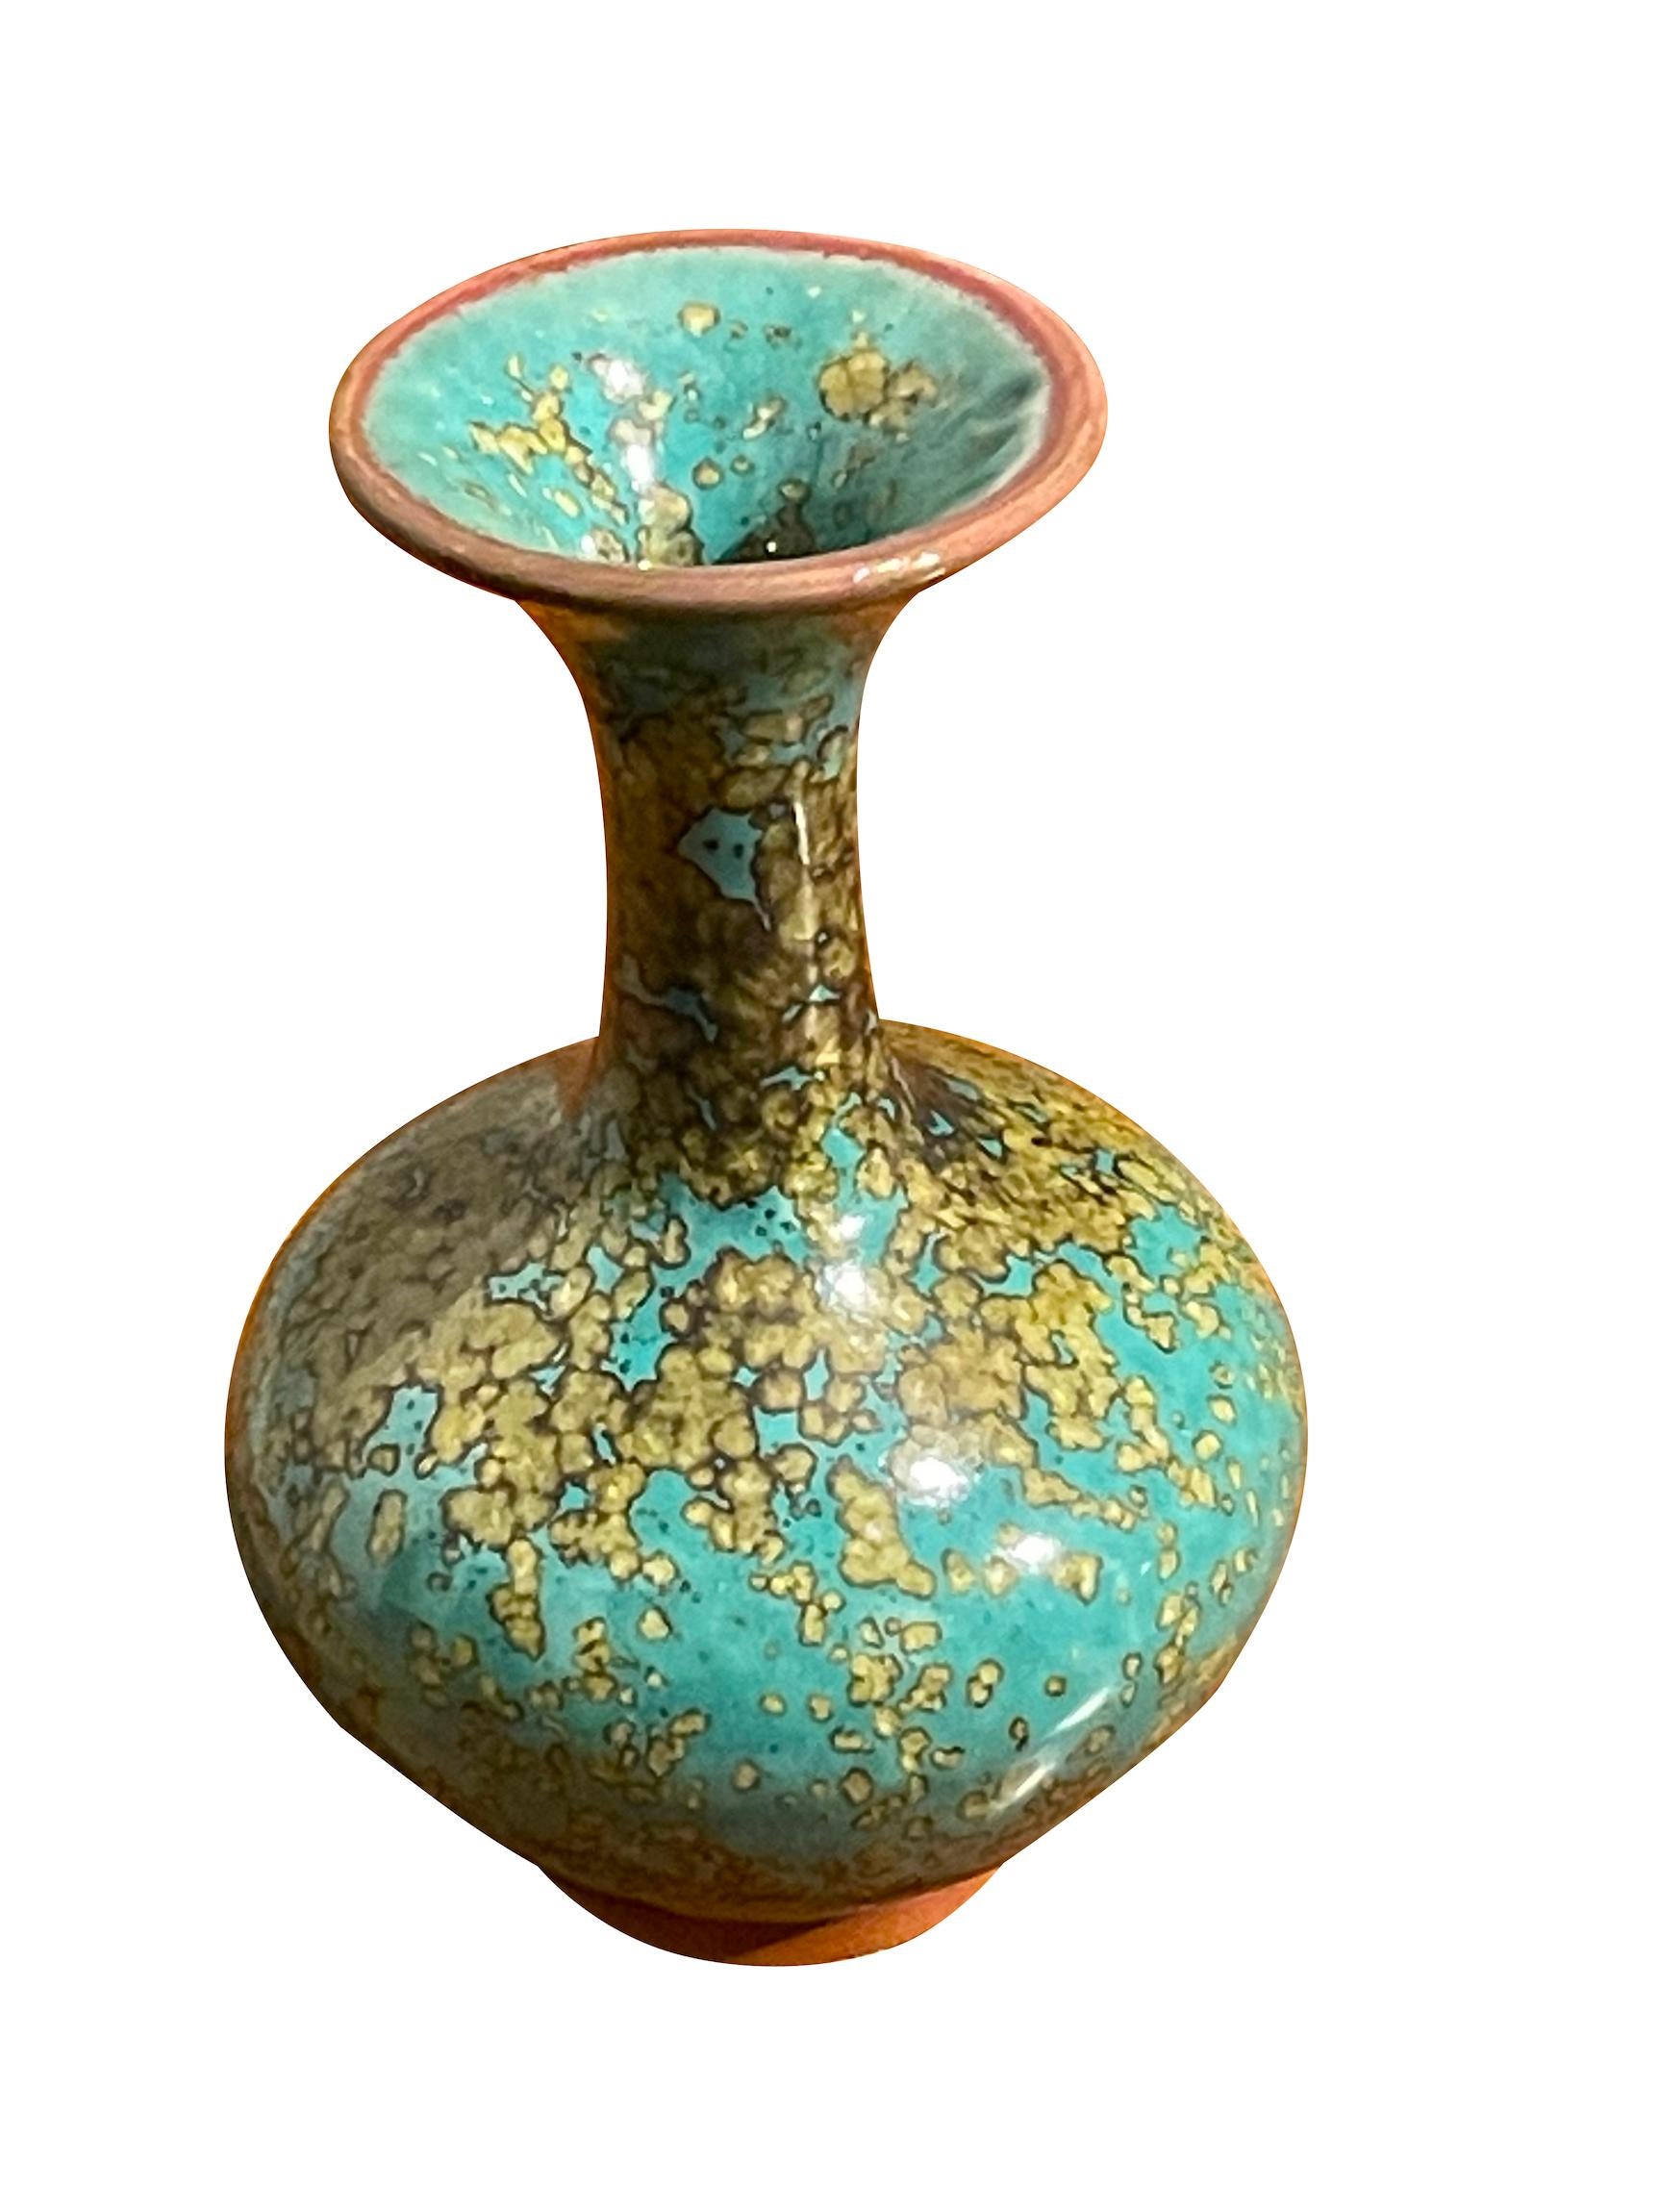 Contemporary Chinese turquoise with gold speckled glaze vase.
Classic shape with wide spout opening.
One of several pieces from a large collection.
ARRIVING MARCH